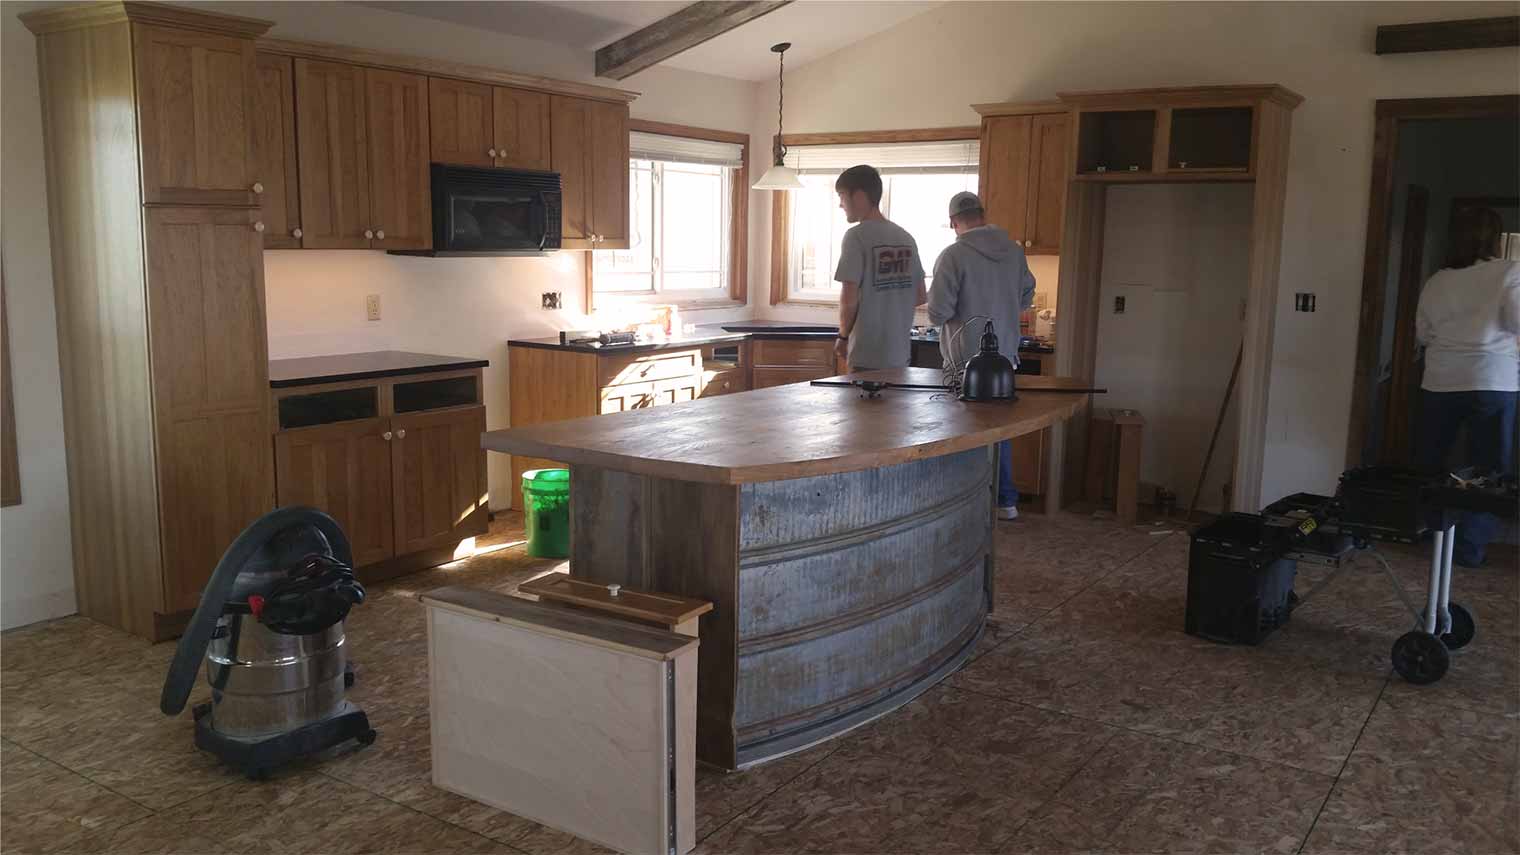 Remodeling of farmland kitchen by Silent Rivers features rustic island is made from old silo parts and the wooden top is repurposed lumber. 